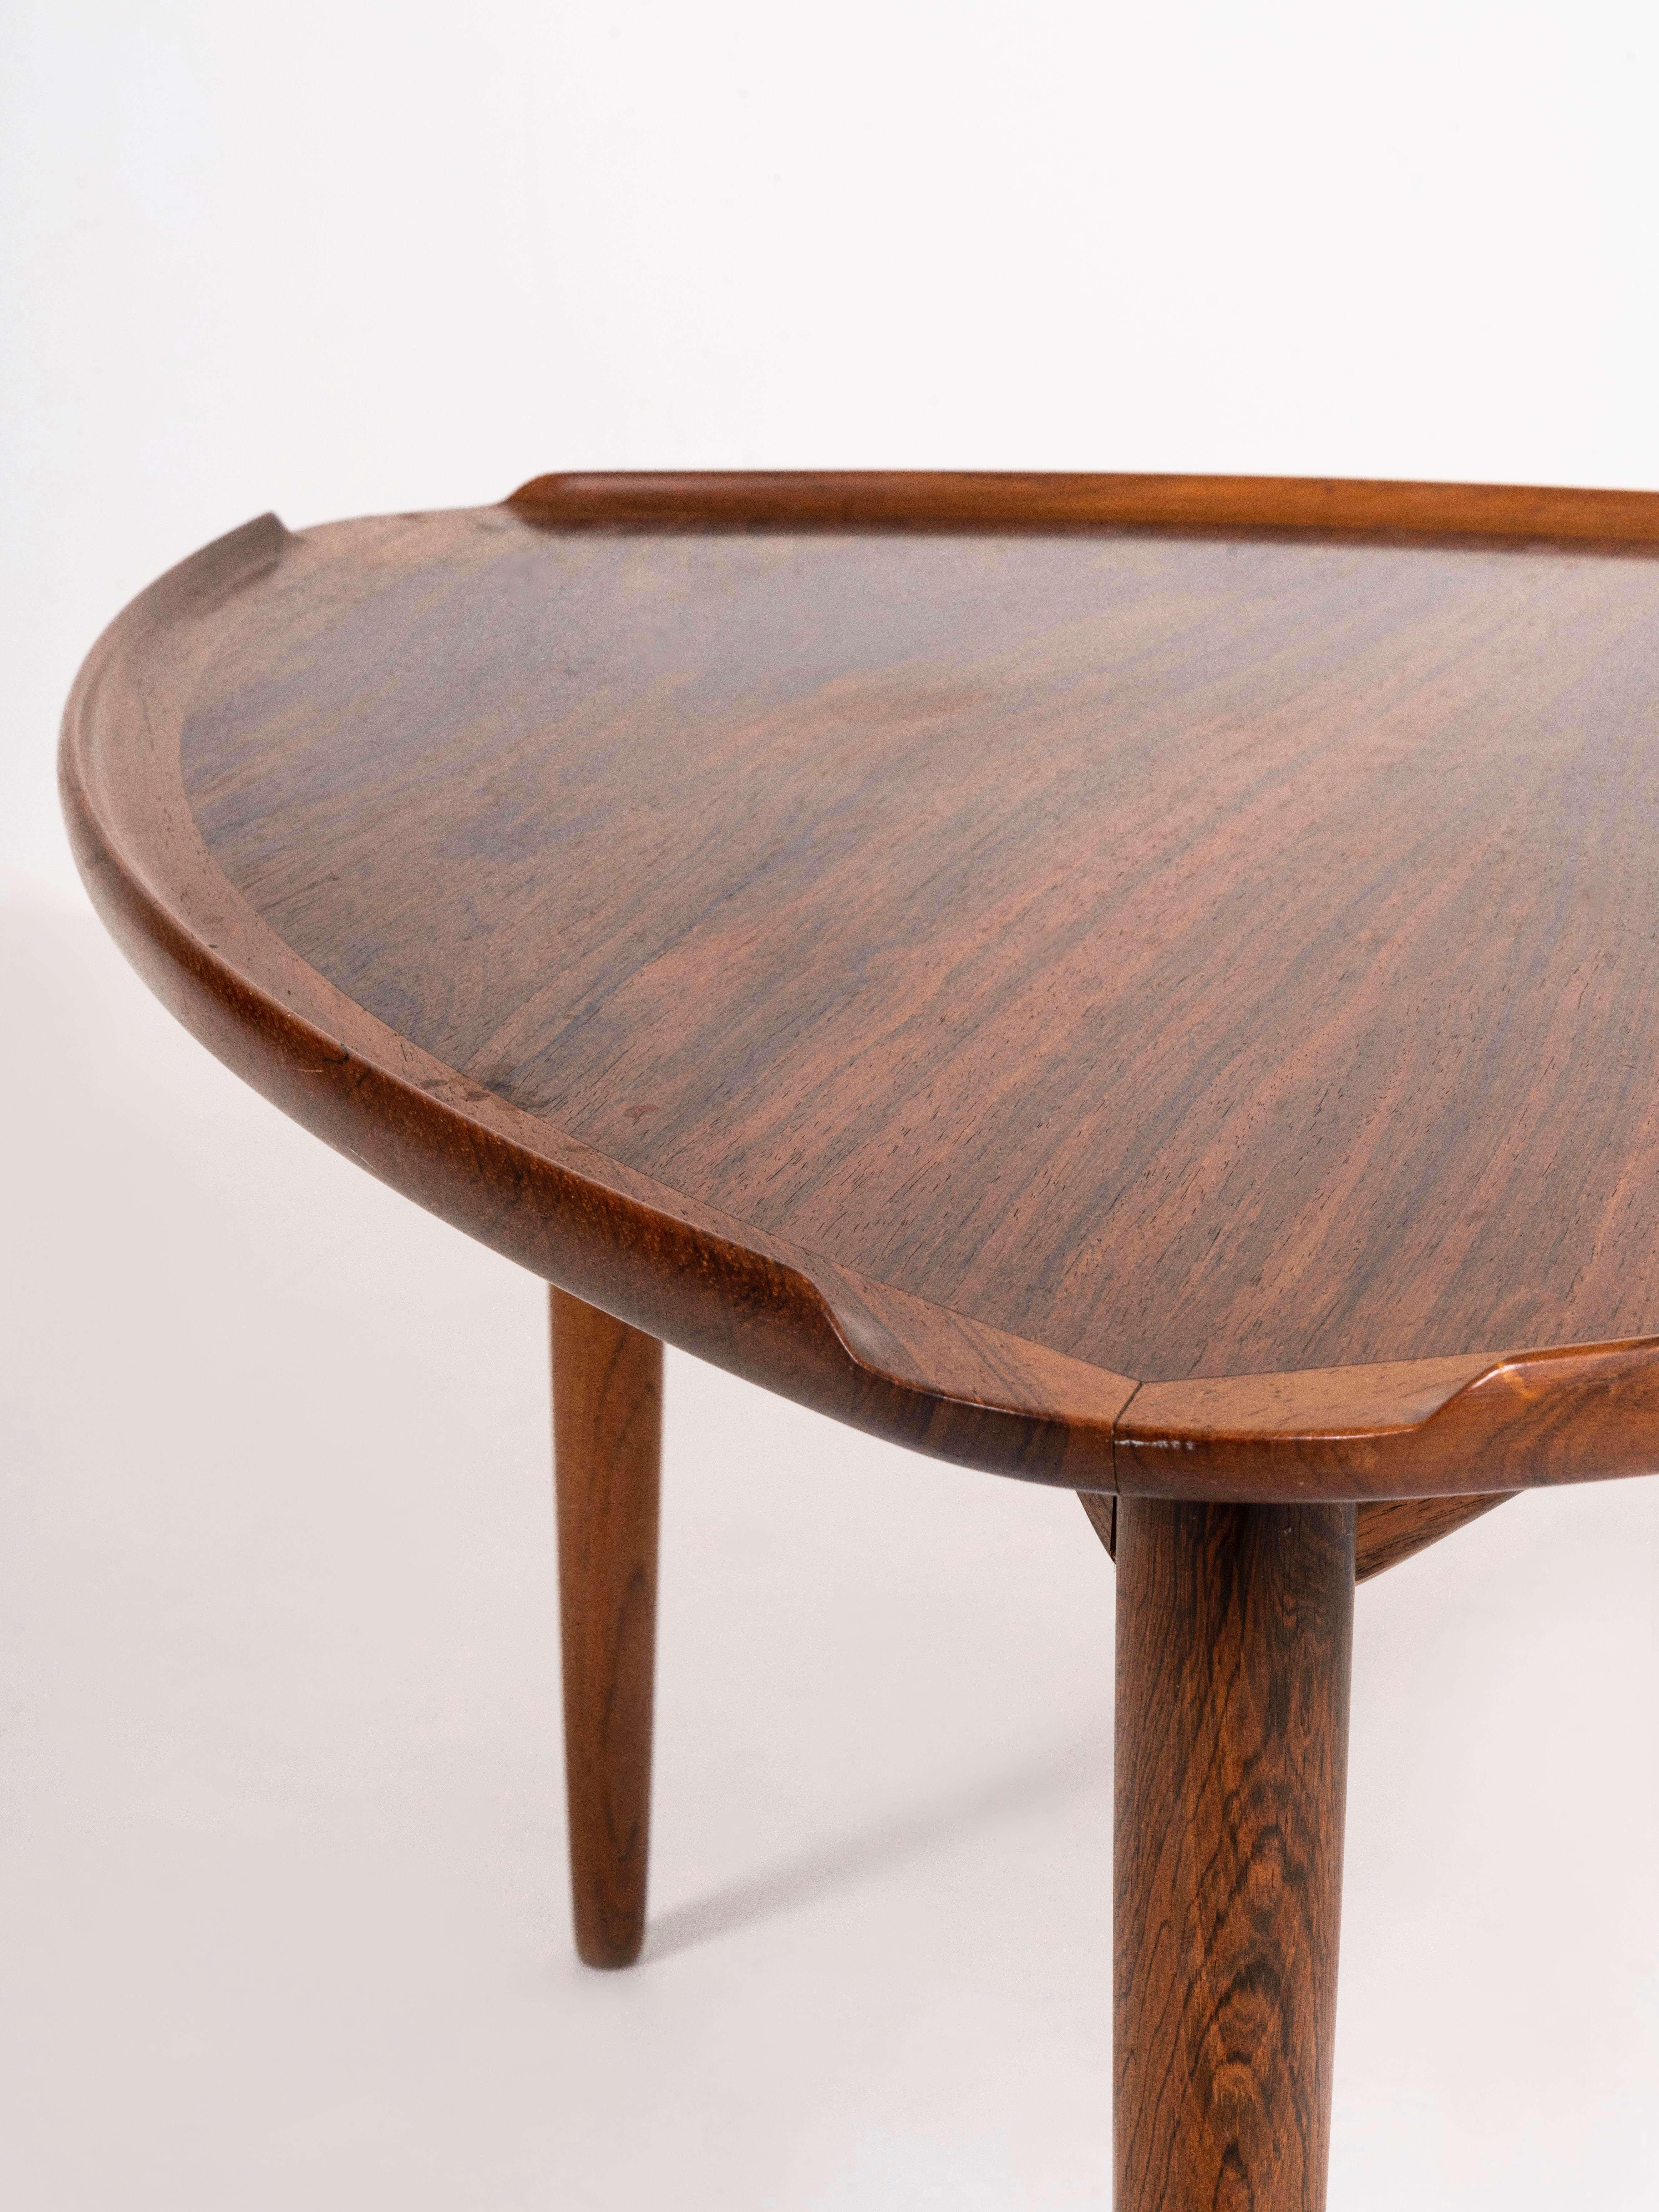 Mid-20th Century Poul Jensen Coffee Table in Rosewood for Silkeborg, Denmark, 1950s